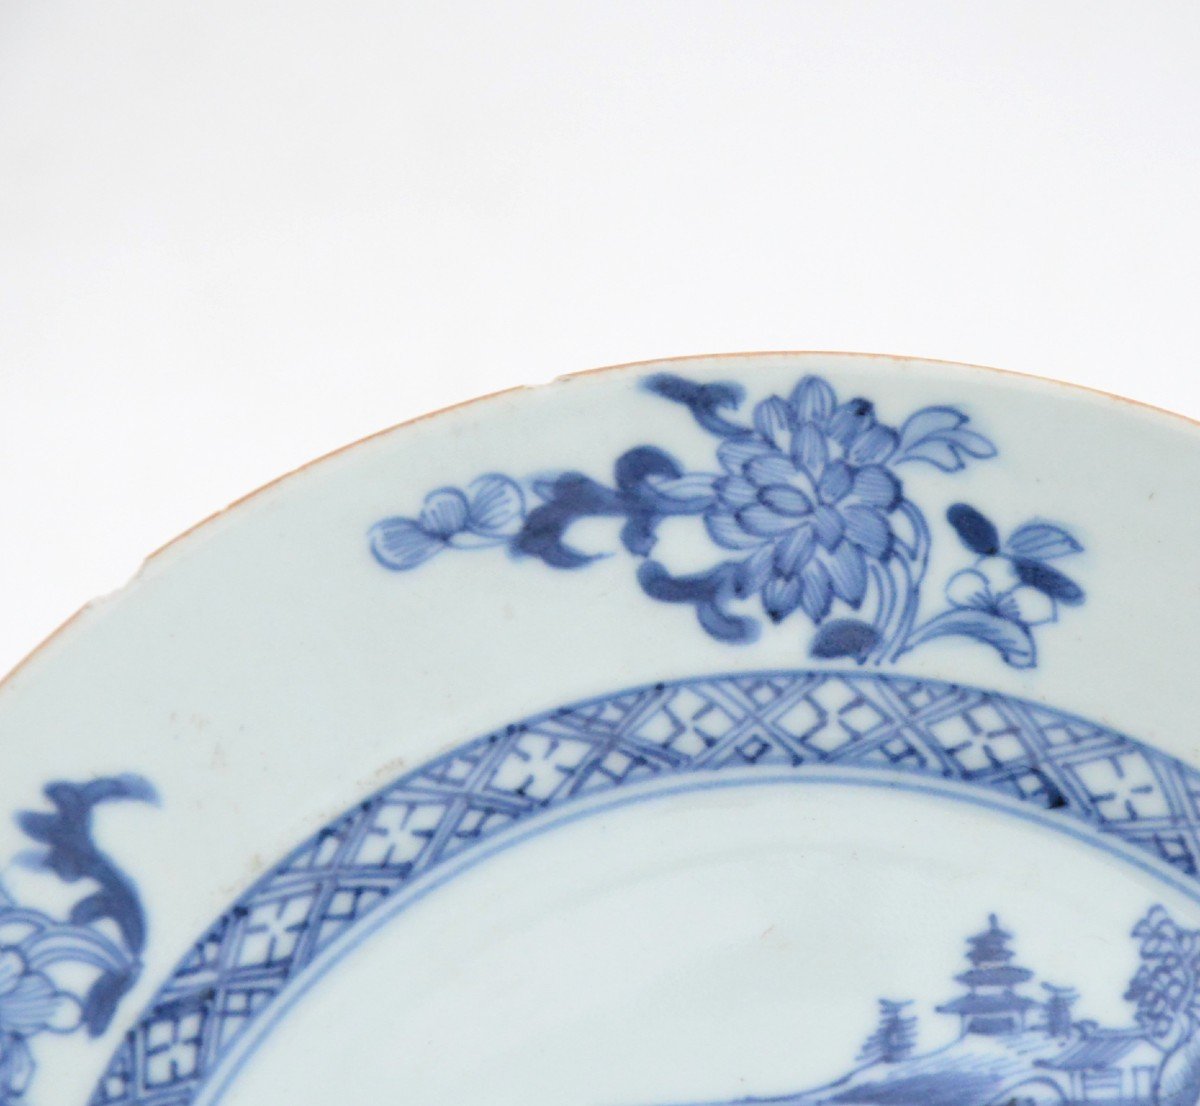 Suite Of Eight Export Chinese Porcelain Plates With Blue And White Decor 18th Century-photo-1